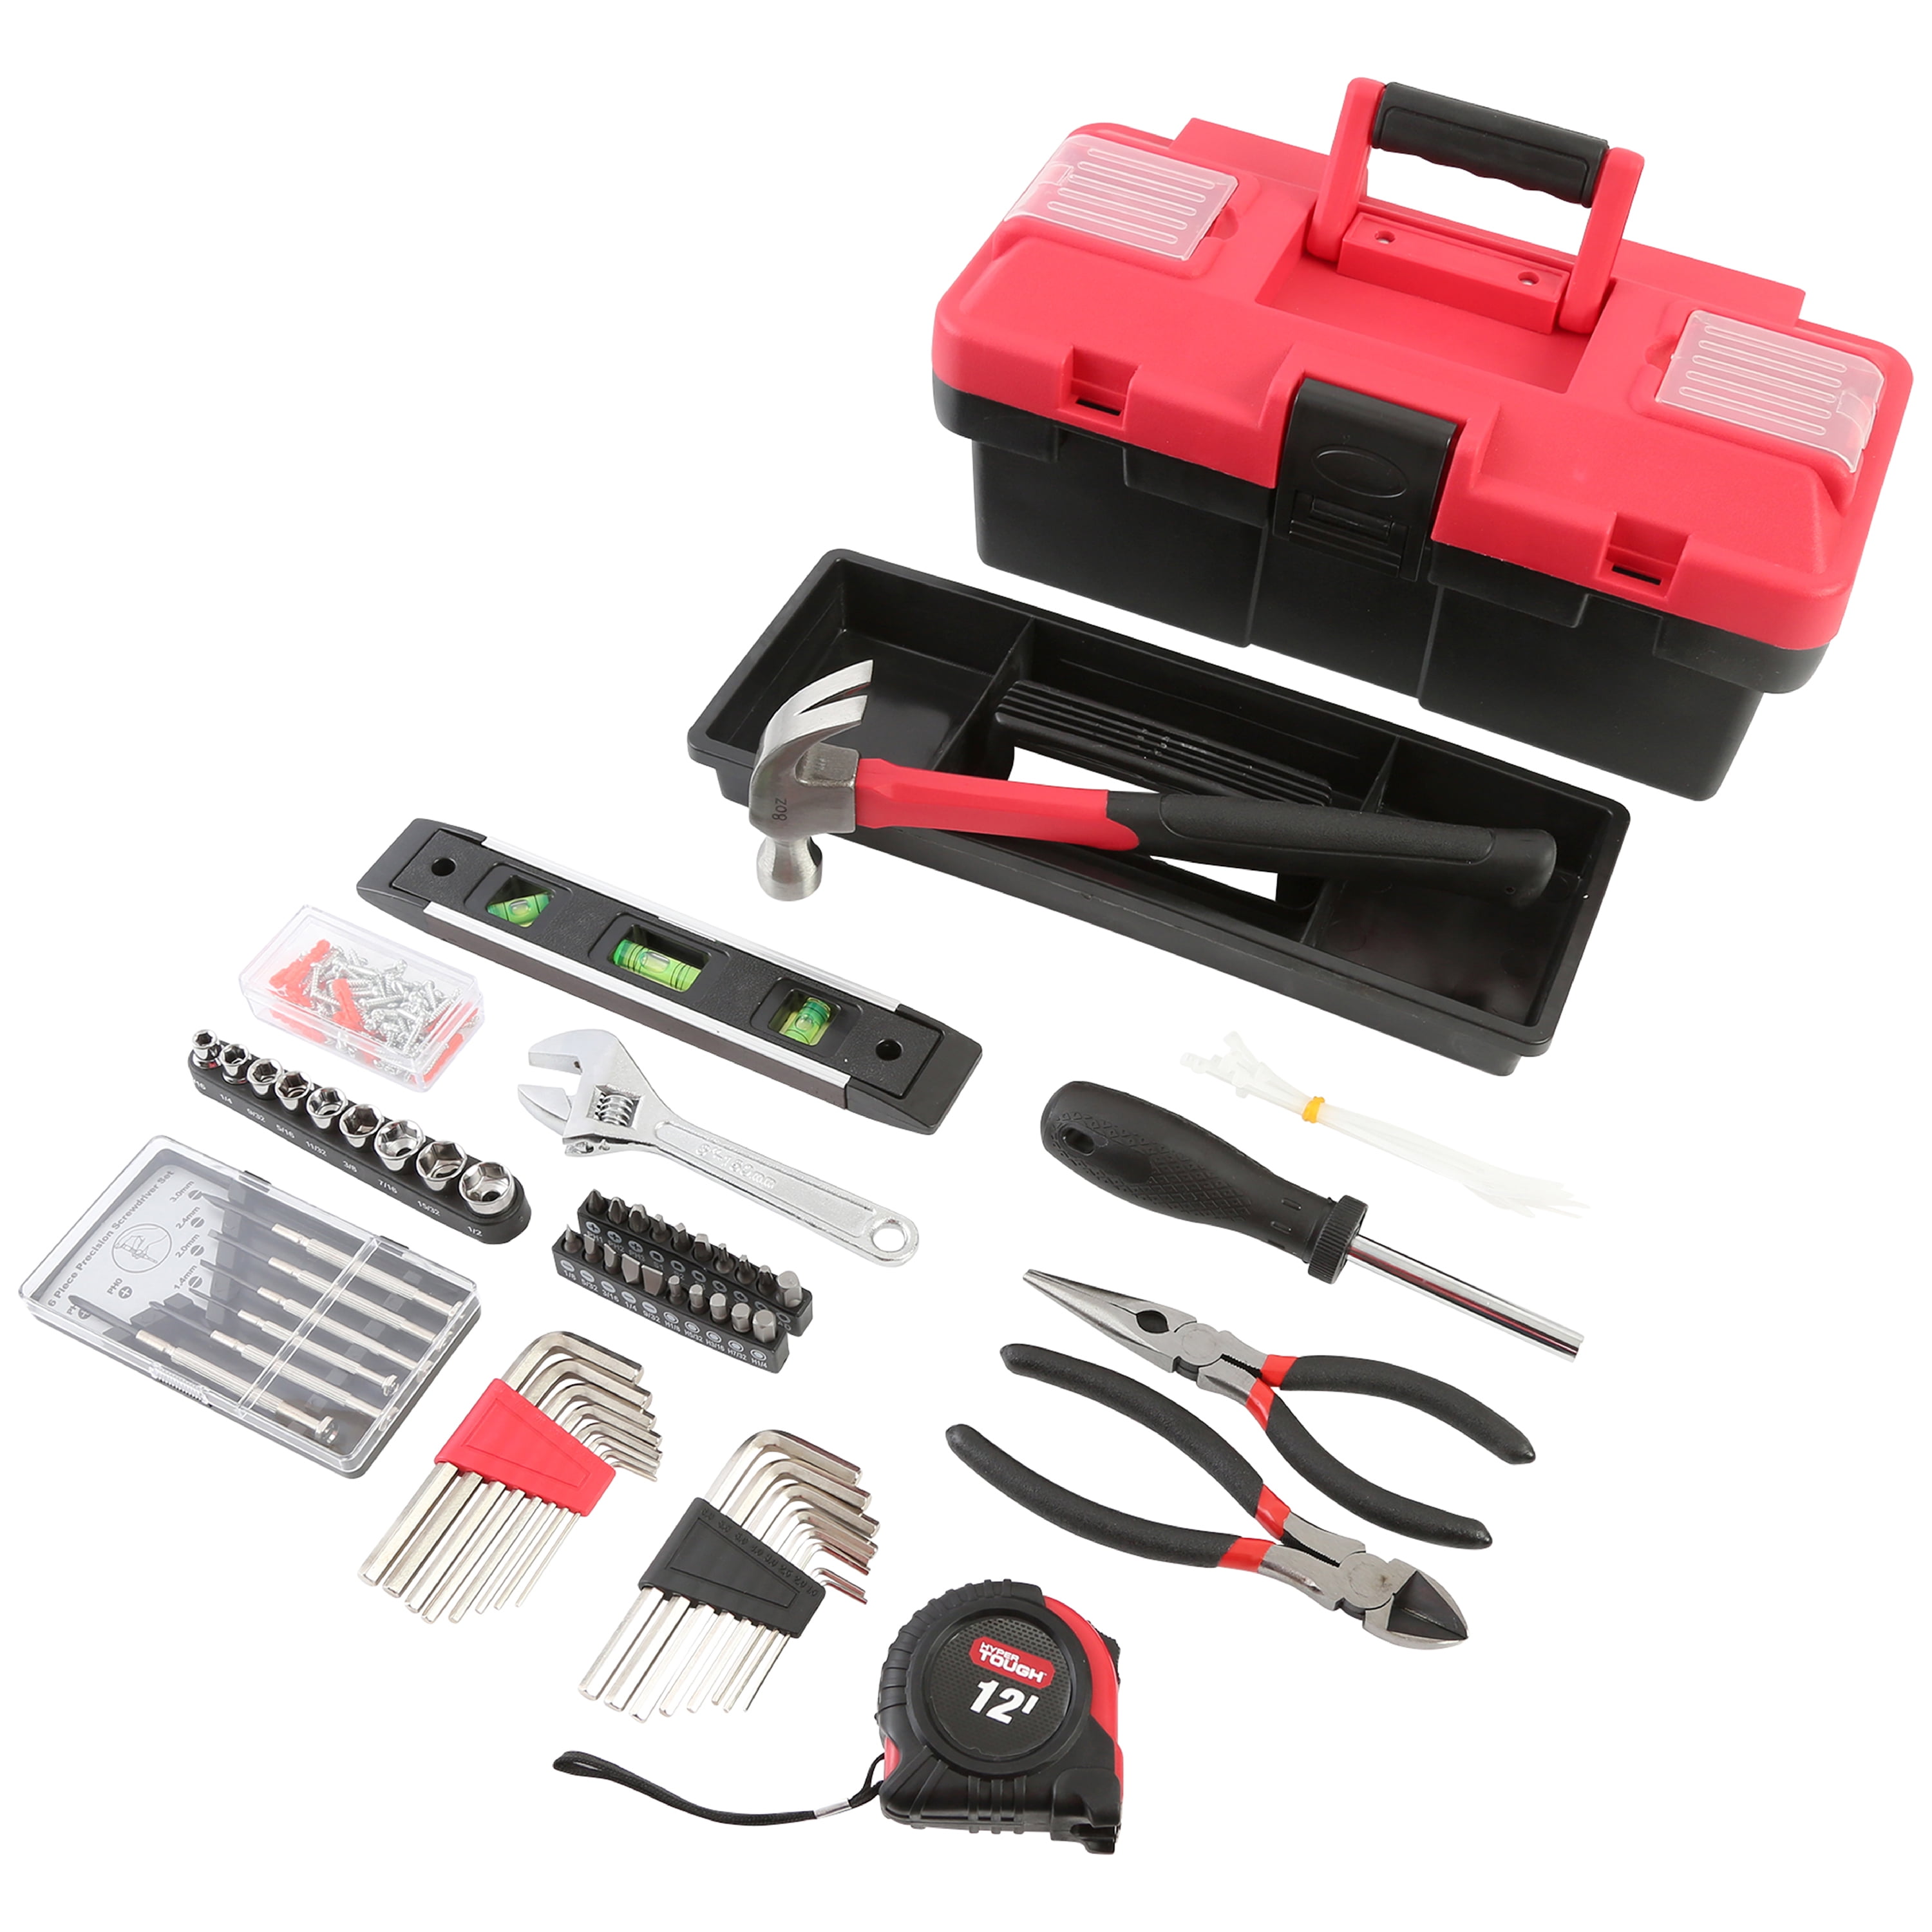 Hyper Tough 160-Piece Toolbox Set for Home and Auto